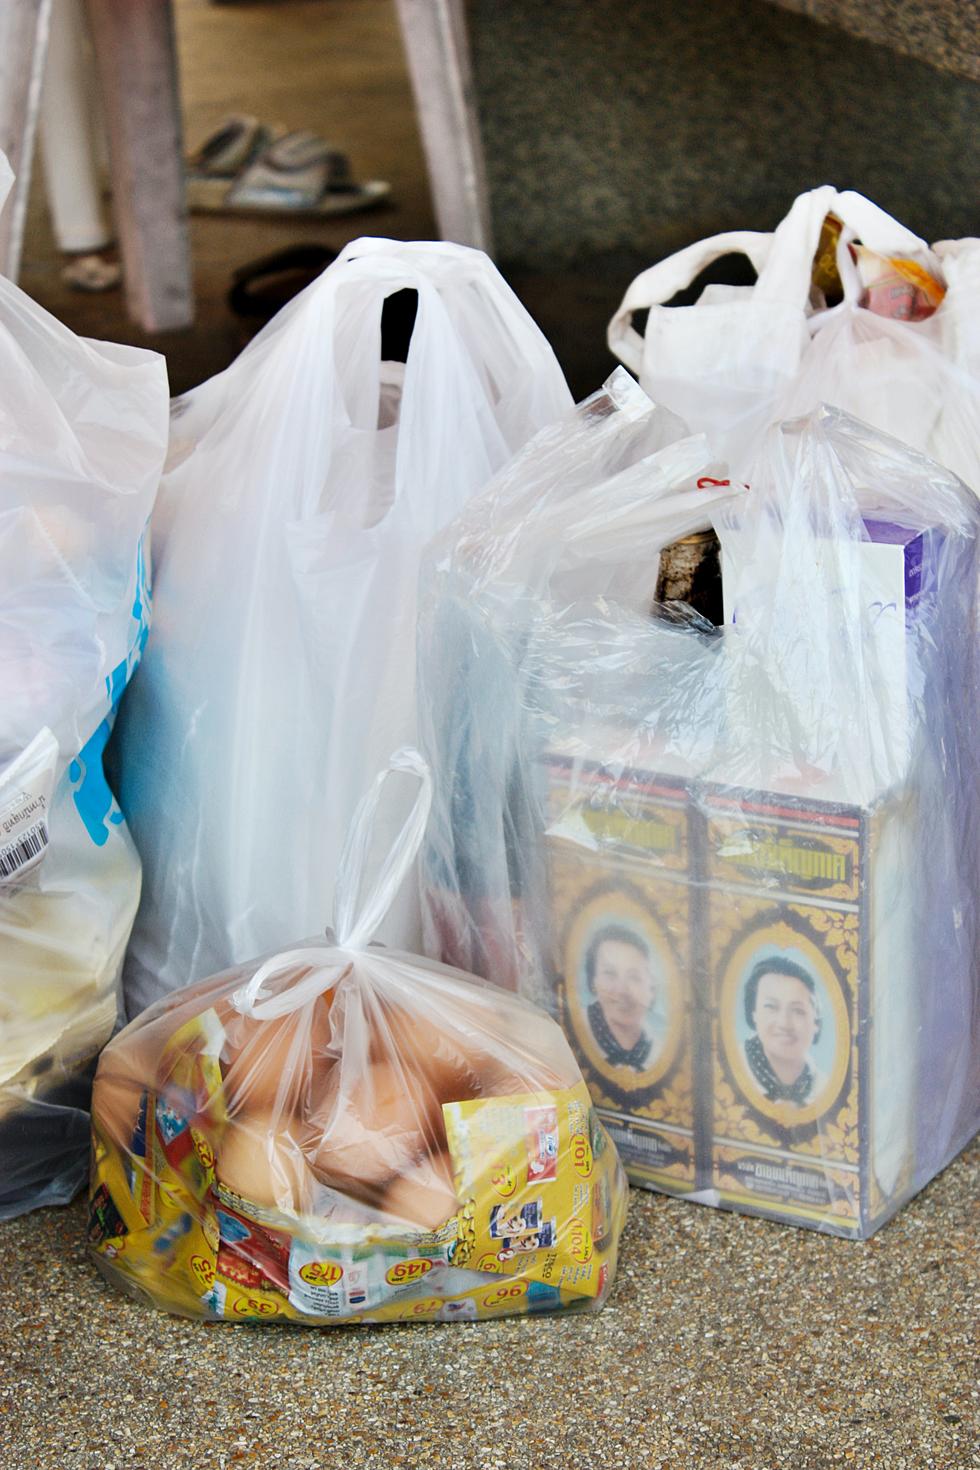 The Plastic Grocery Bag Fee Ban in Yakima Valley Is Over